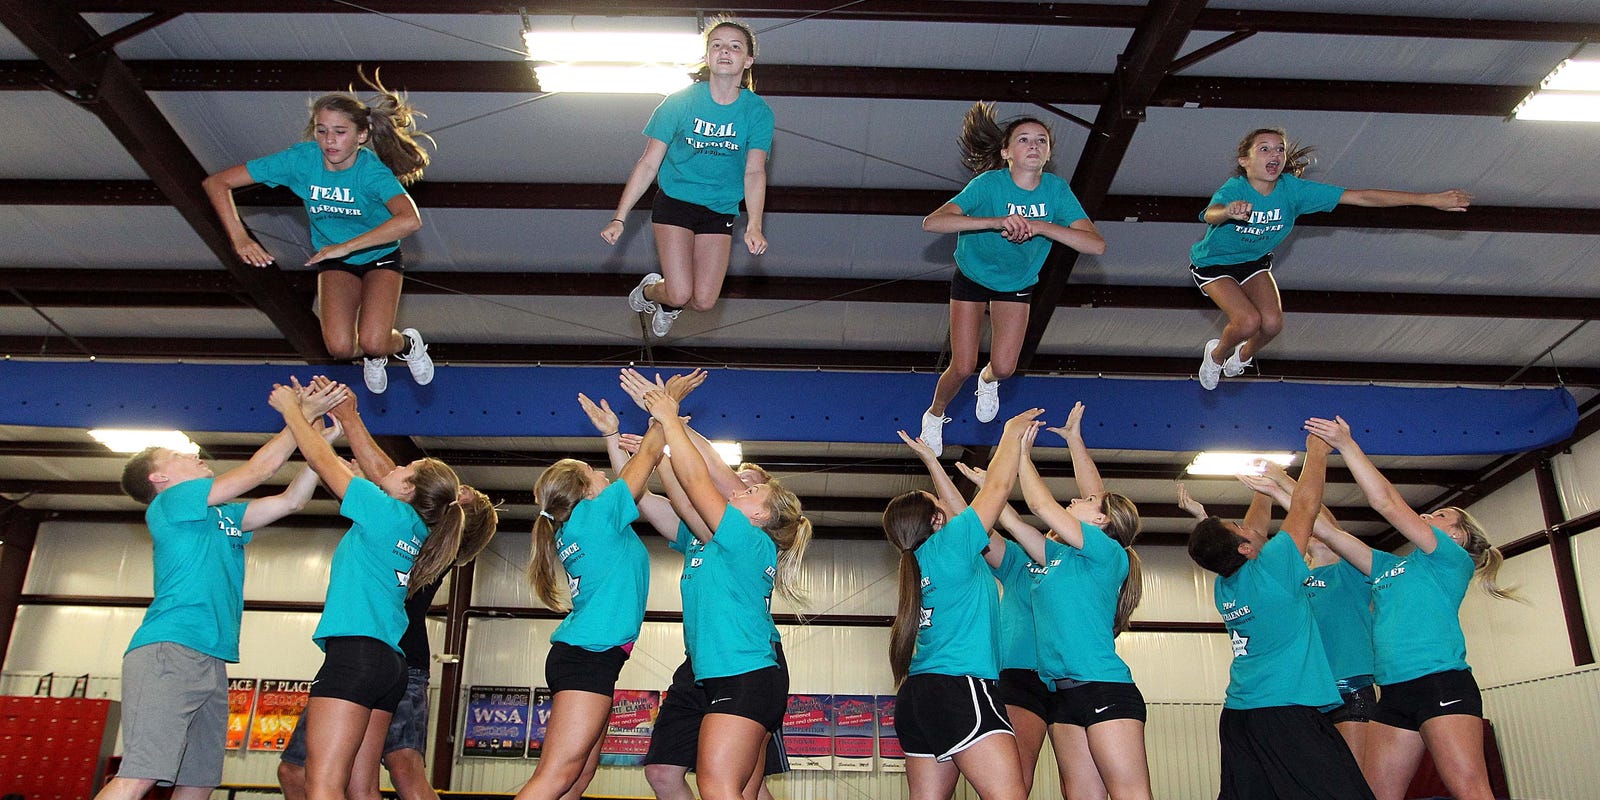 Concussions A Concern For Cheerleaders